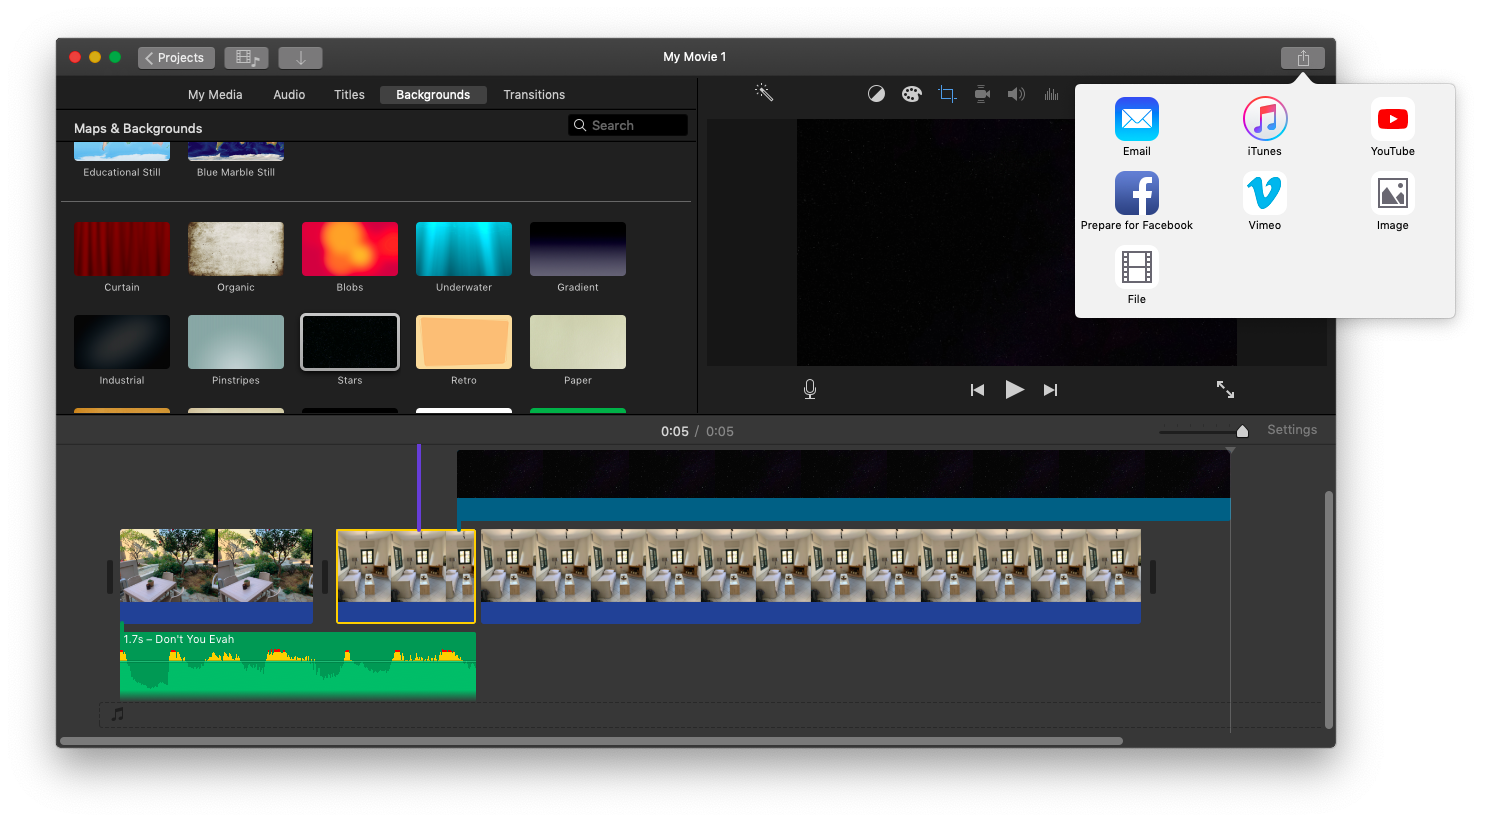 imovie export as mp4 instead of mov